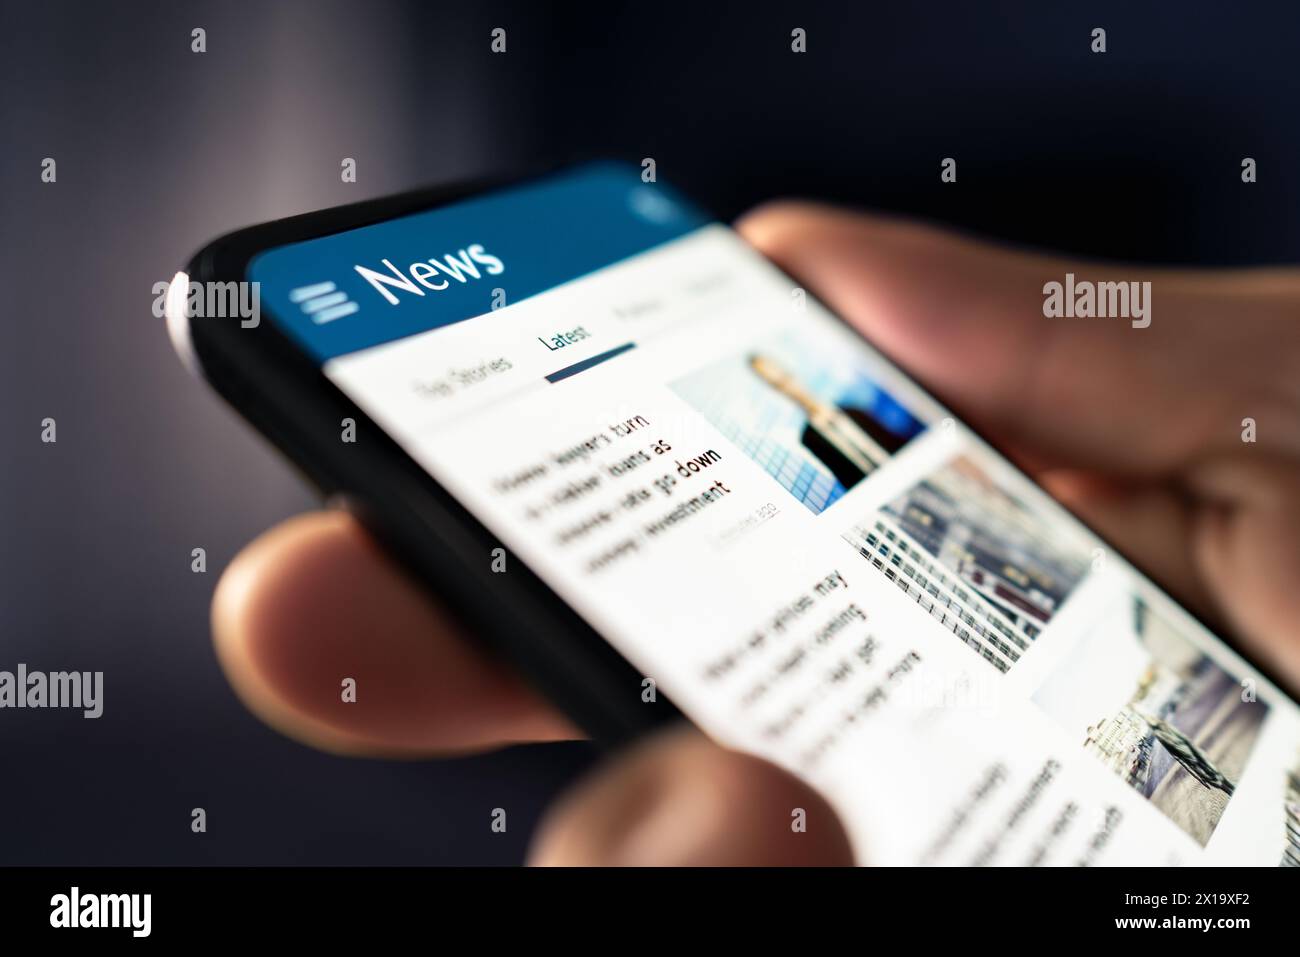 News online. Phone with newspaper headlines and feed. Digital press article. Reader watching latest titles. Mockup media publication website . Stock Photo